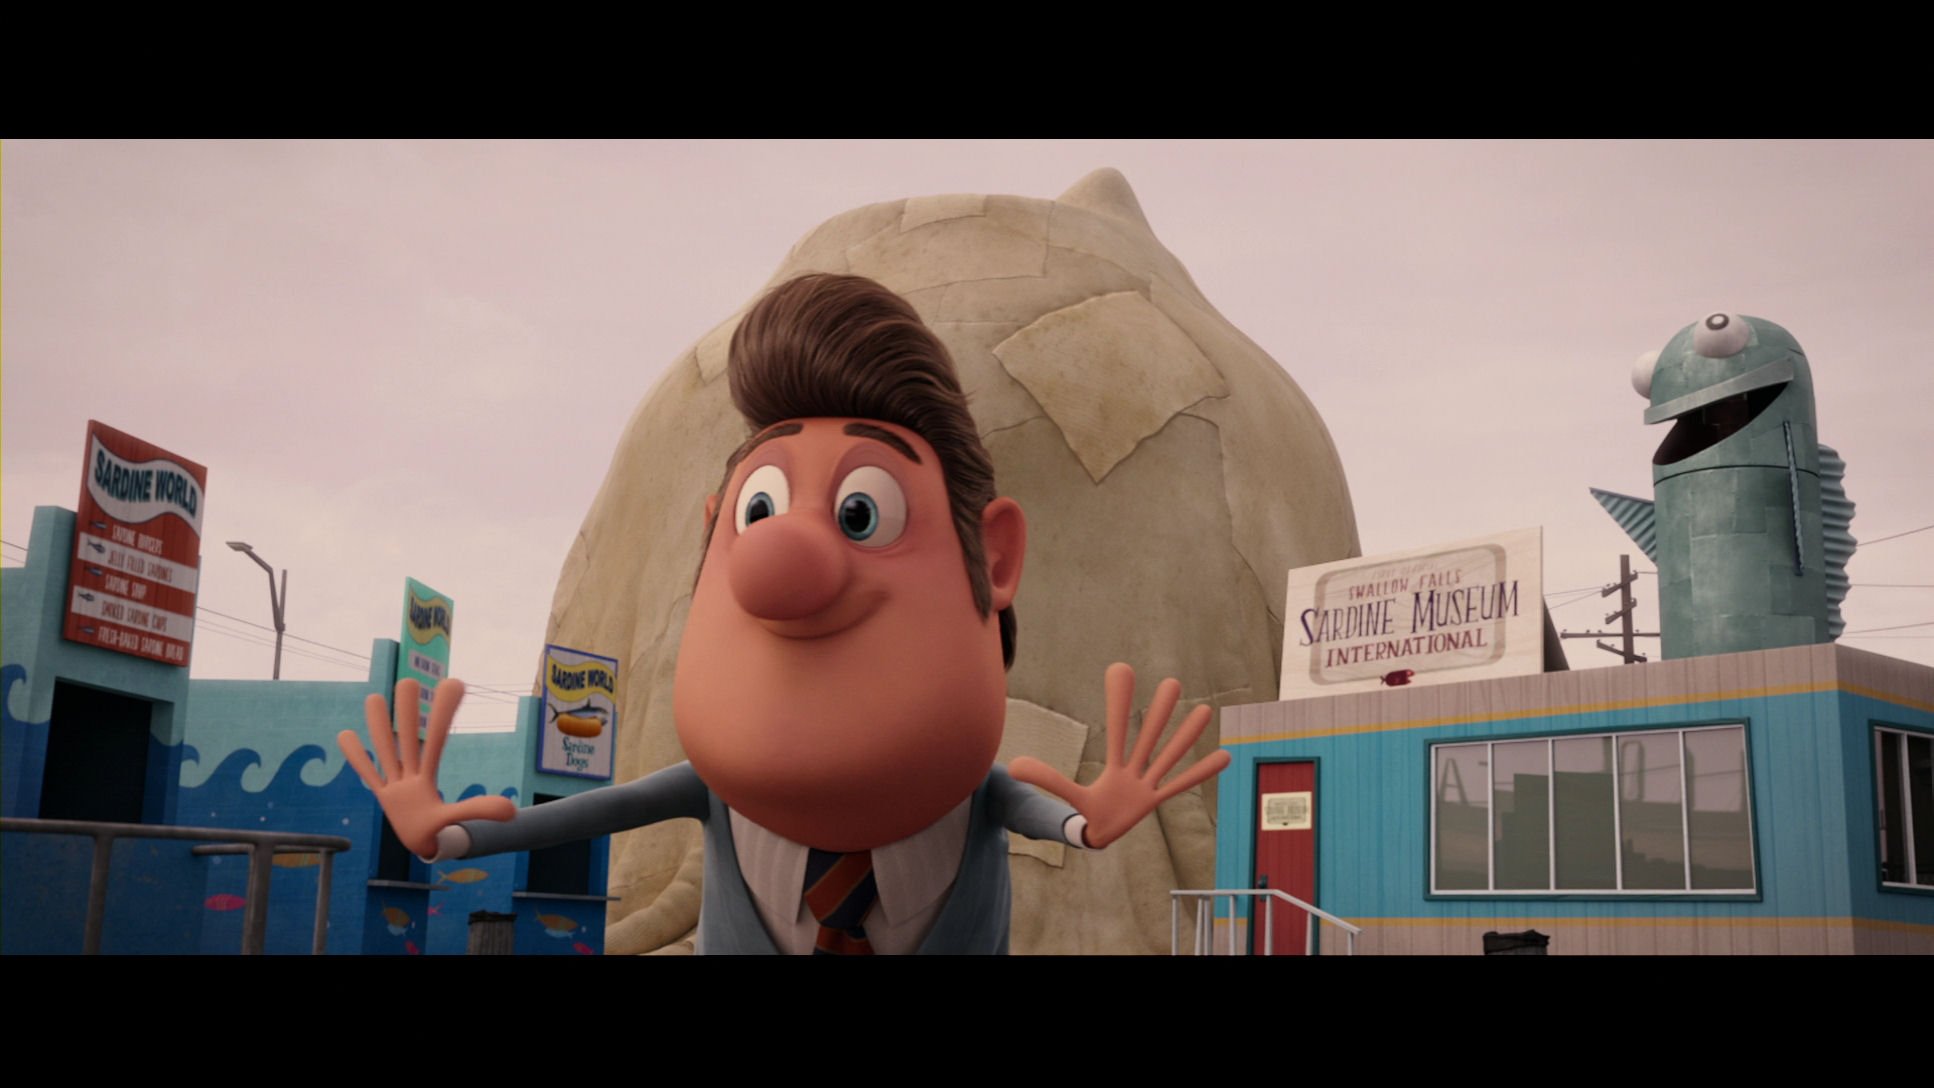 Screenshot from Cloudy with a Chance of Meatballs Blu-ray. 